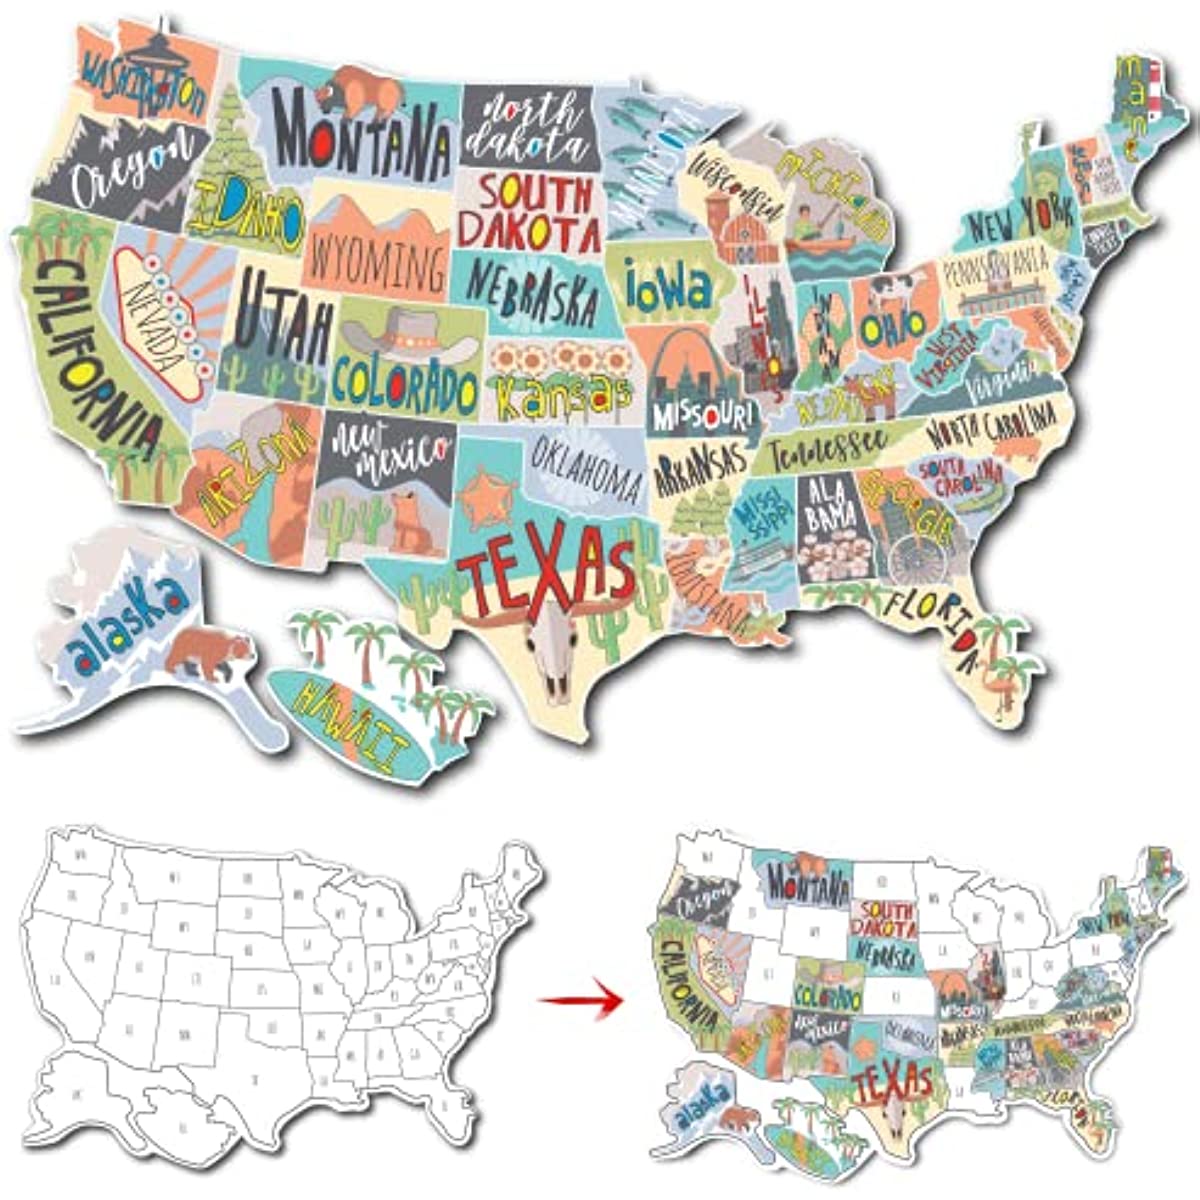 

Rv State Sticker Travel Map Of The United States | 50 States Stickers Of Us | Vinyl Decal Bumper Sticker For Rvs | Camper Accessories Rv Accessories